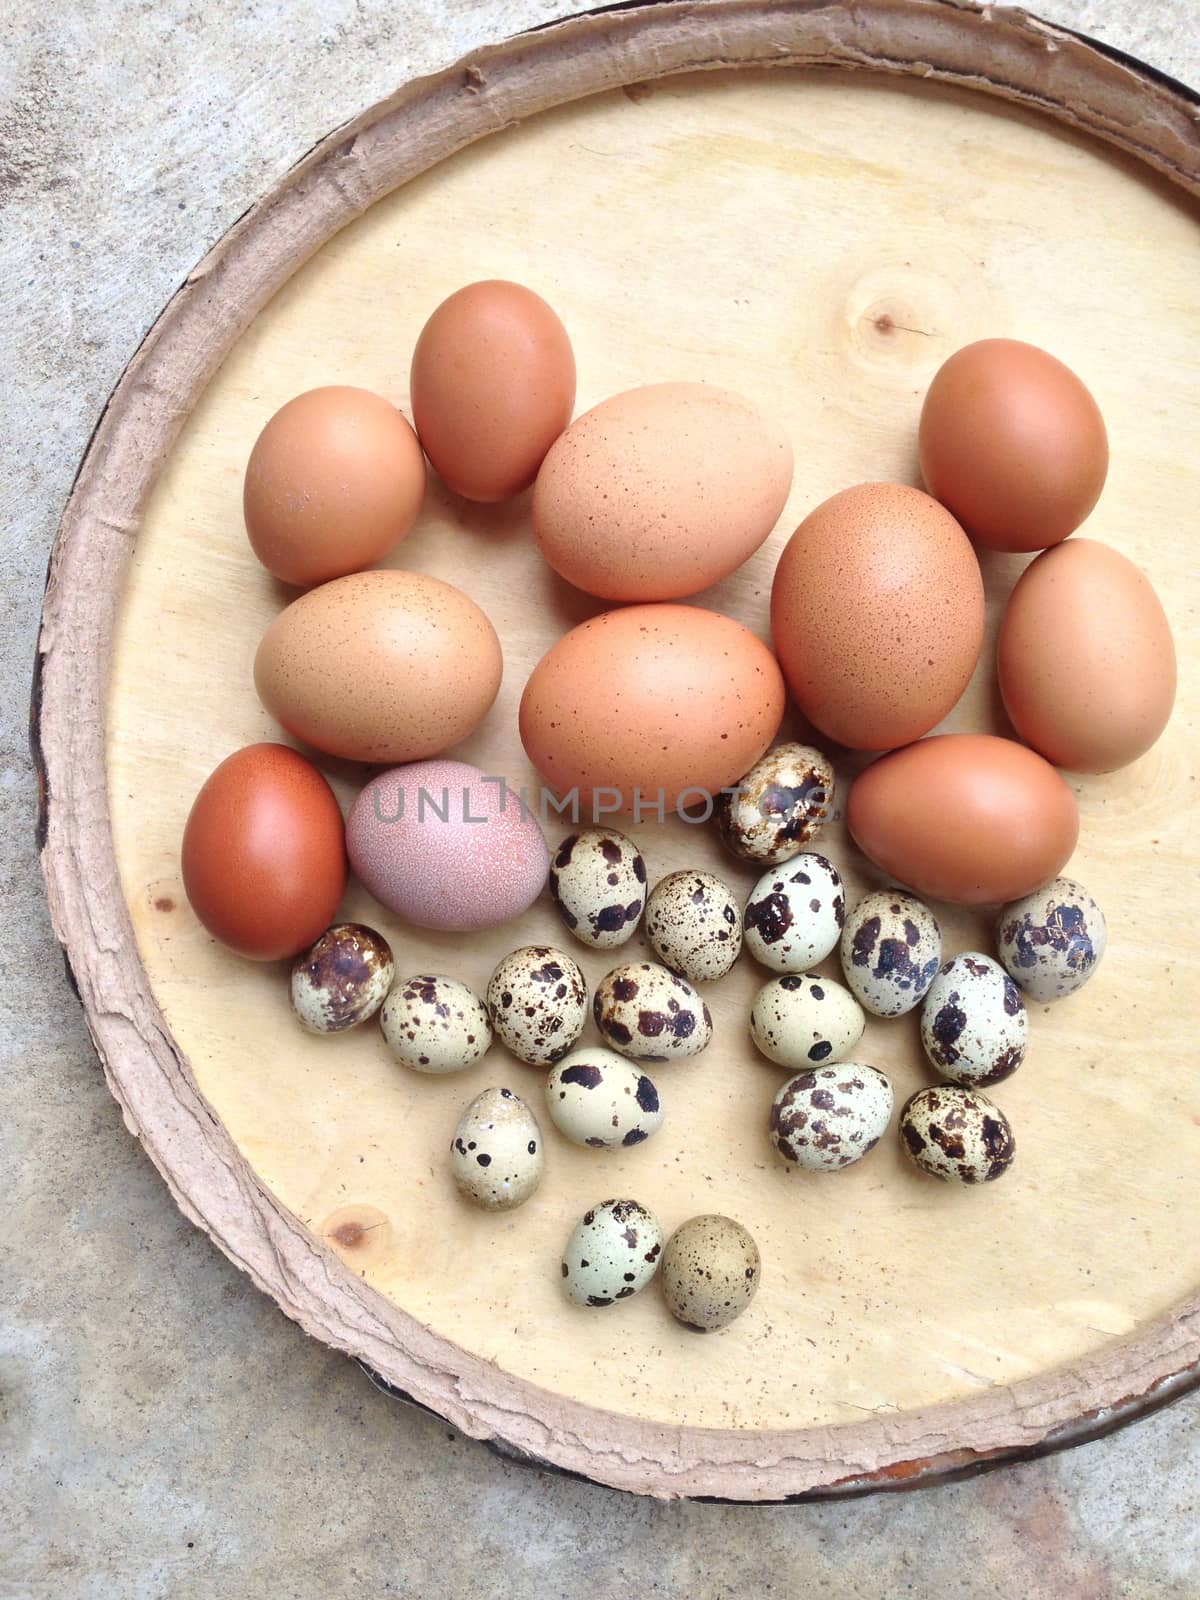 Chicken eggs and Quail eggs in wooden plate on cement background by Bowonpat